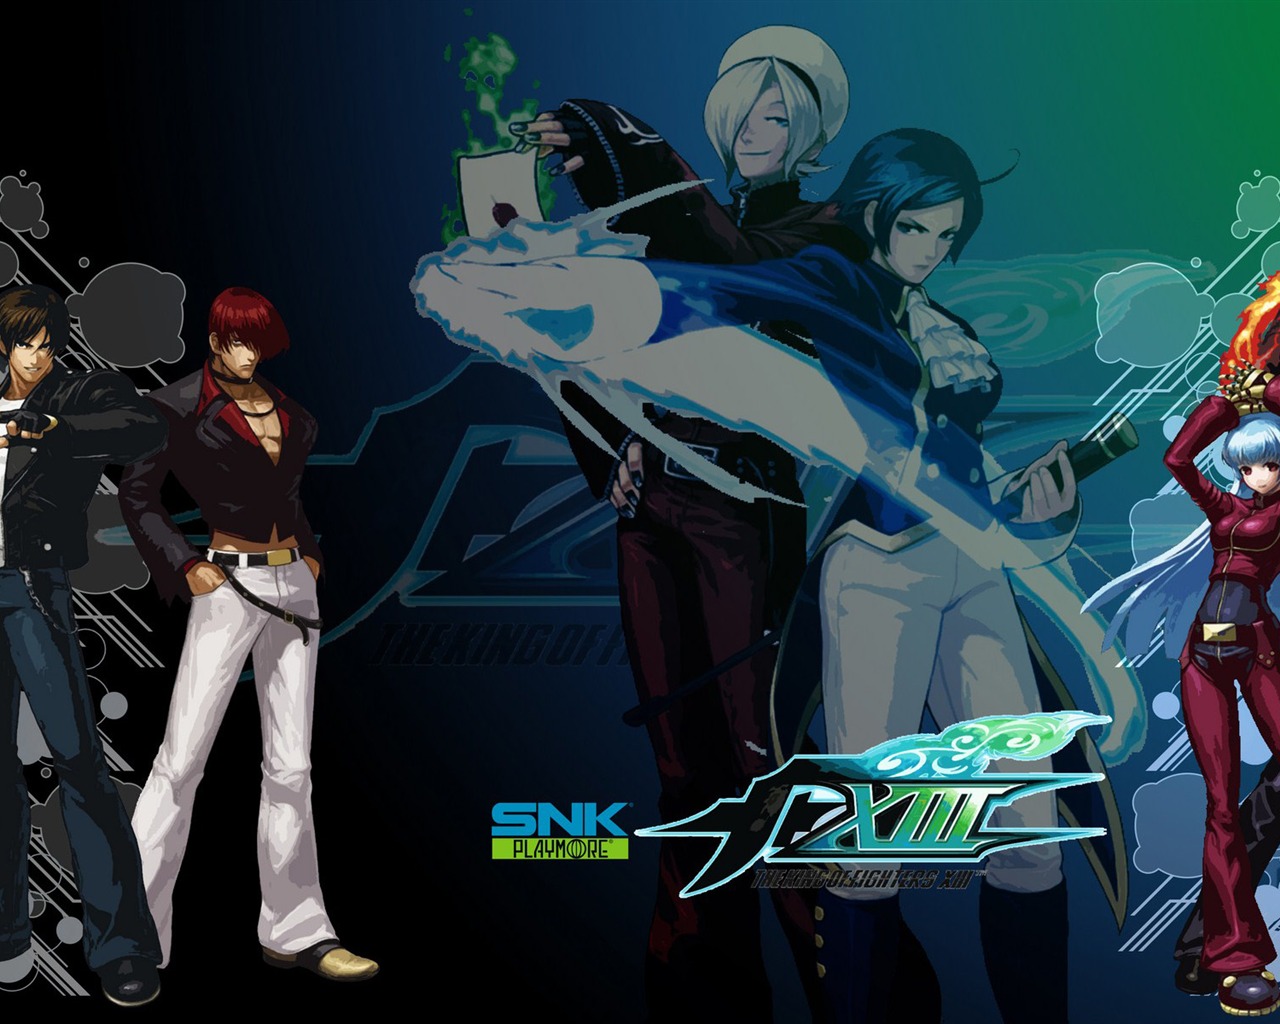 The King of Fighters XIII wallpapers #4 - 1280x1024